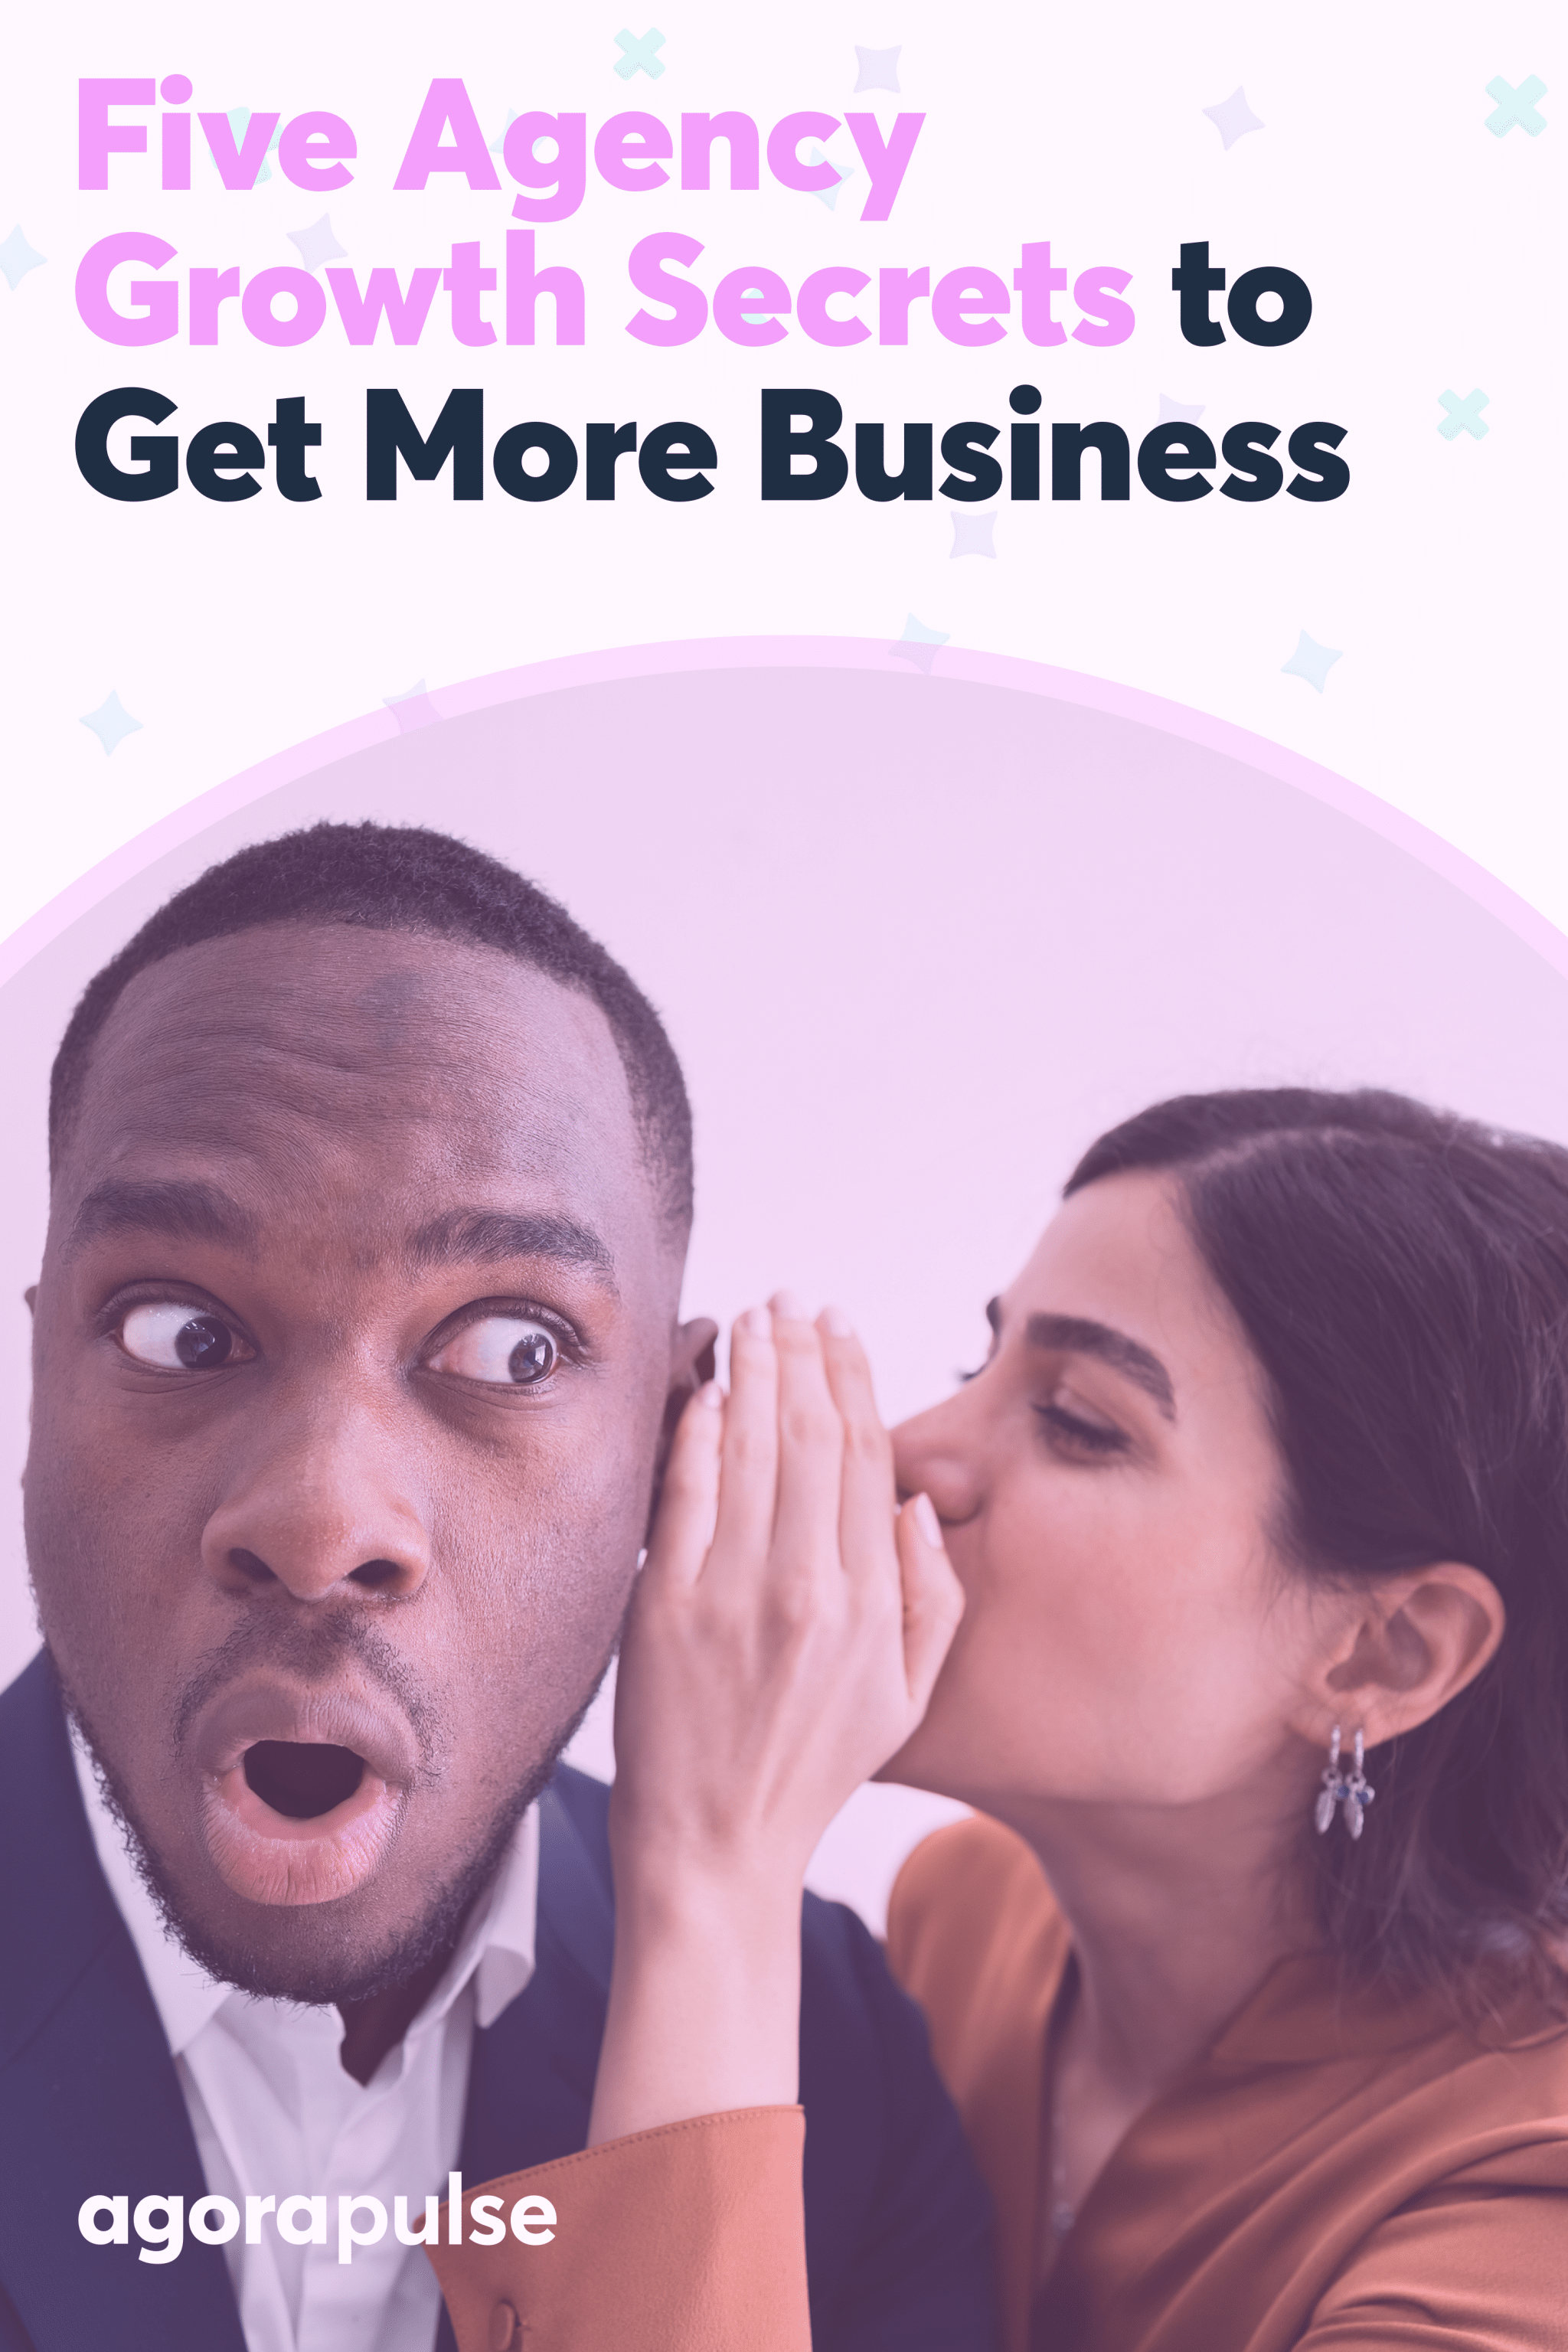 Five Agency Growth Secrets to Get More Business